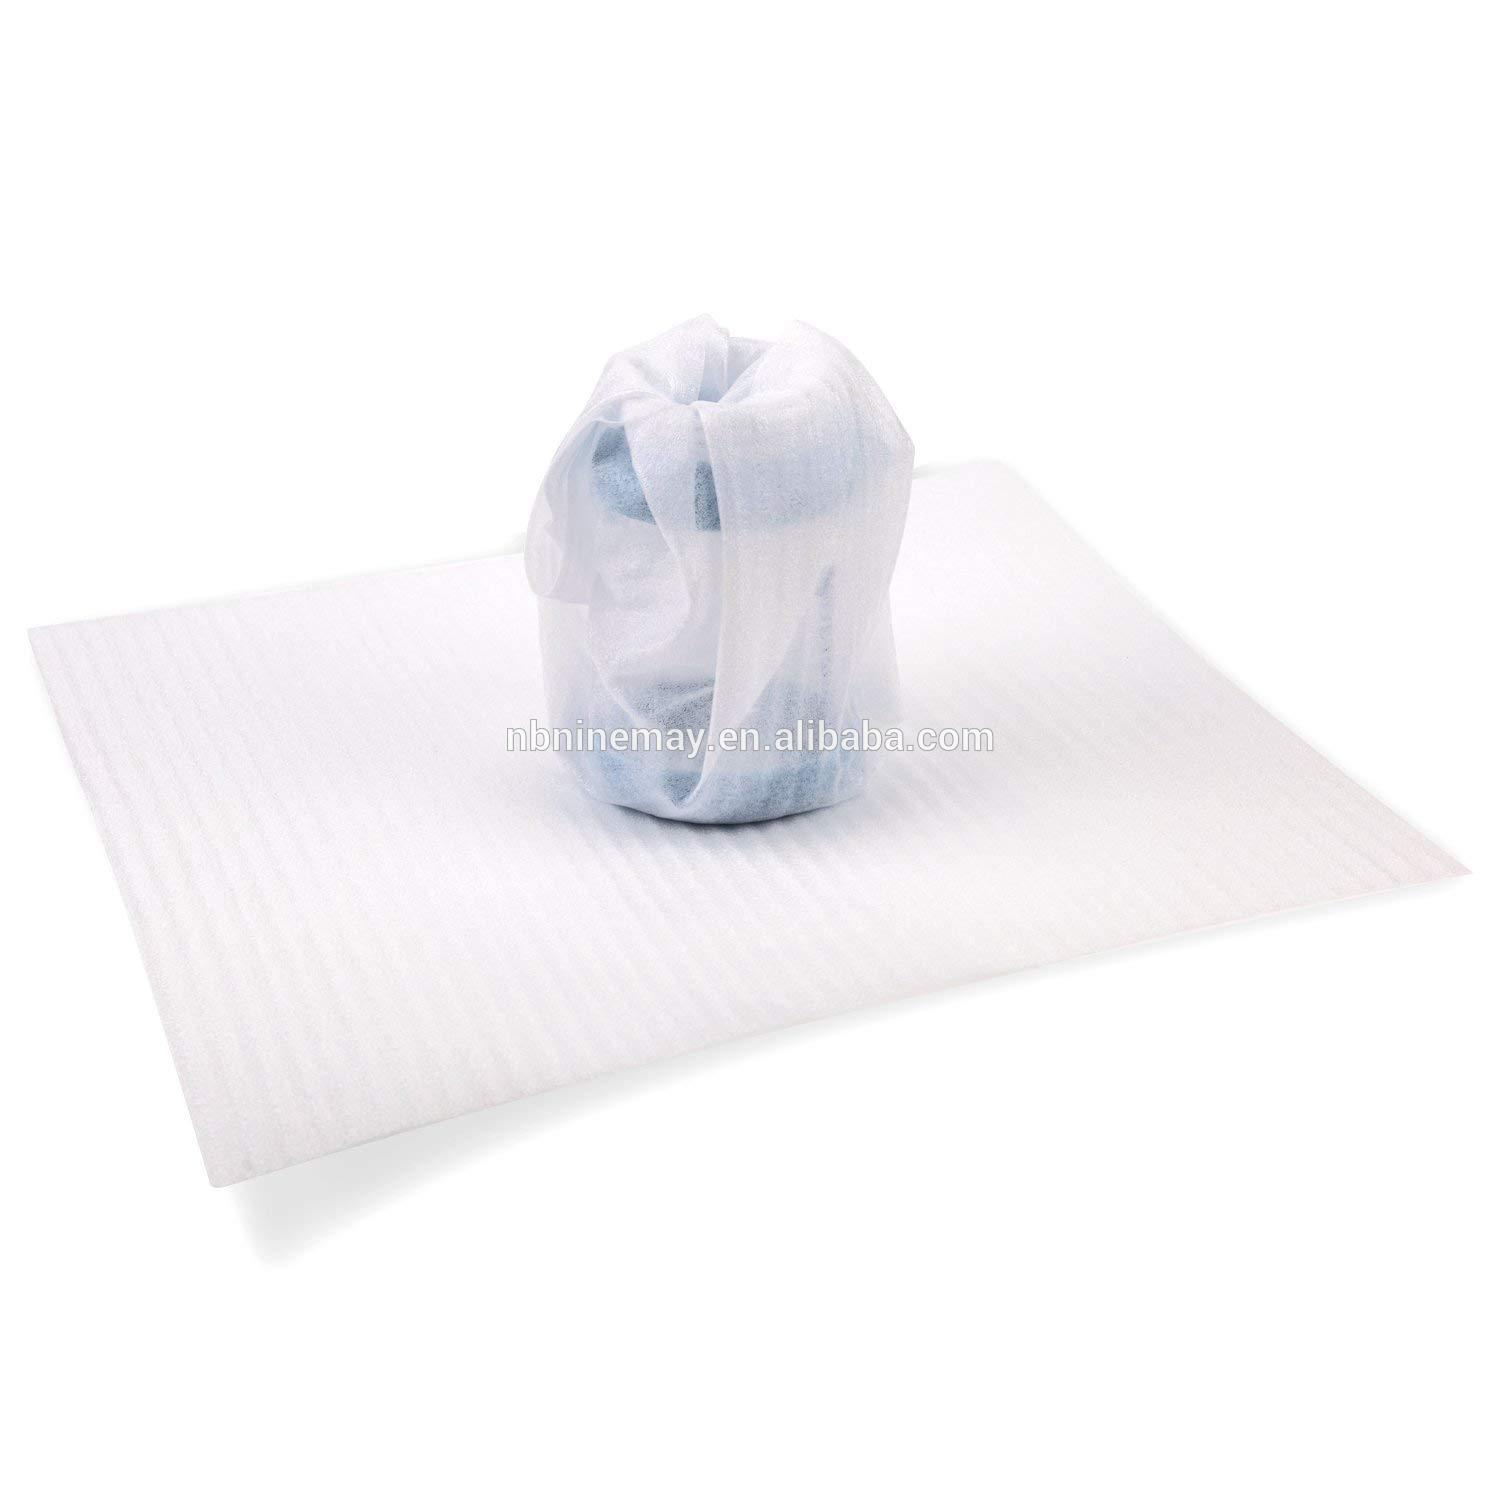 EPE Cushion foam wrap sheets moving supplies packing material all purpose protection storage